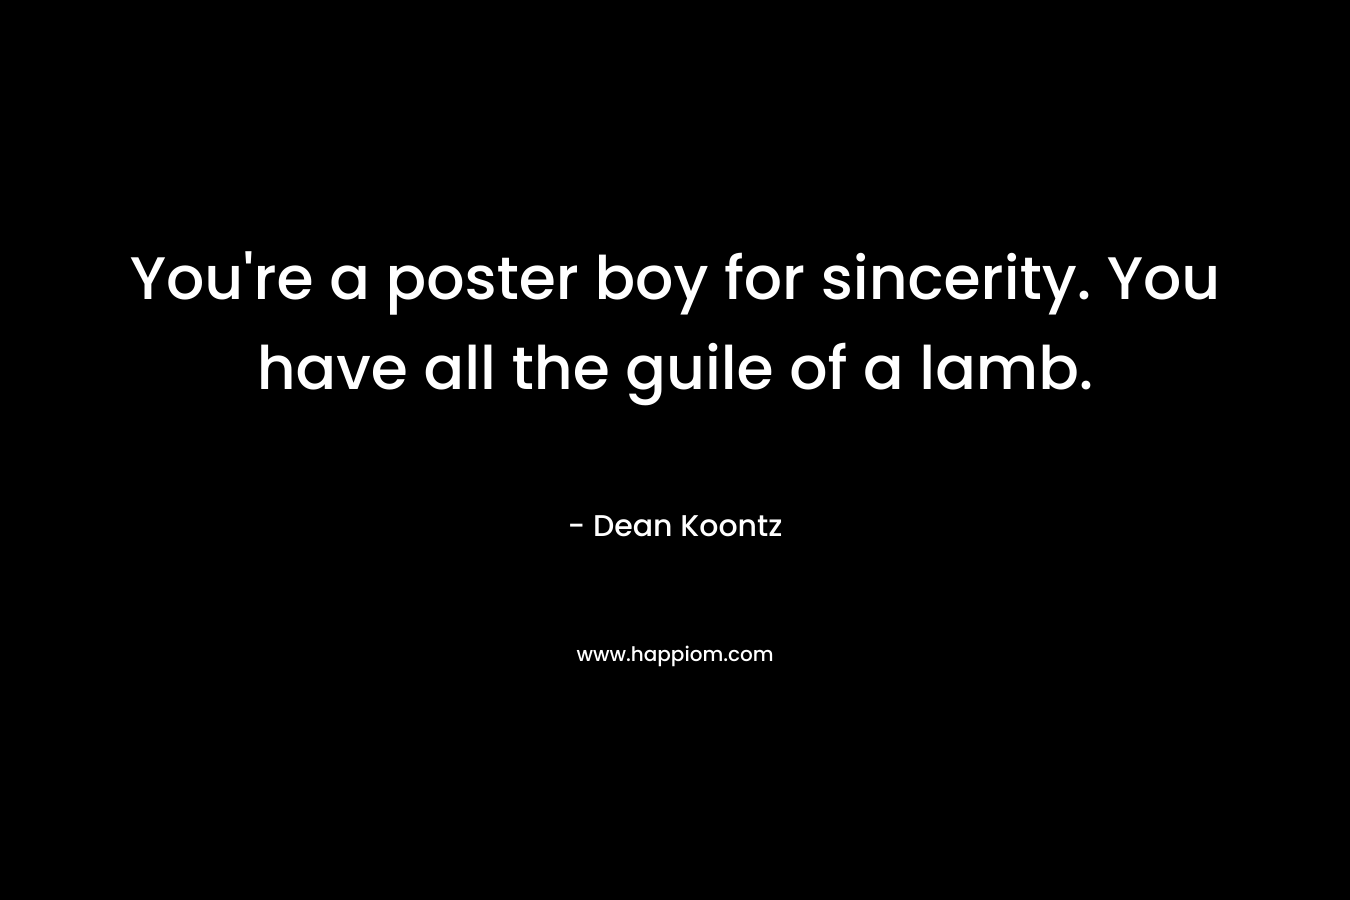 You're a poster boy for sincerity. You have all the guile of a lamb.